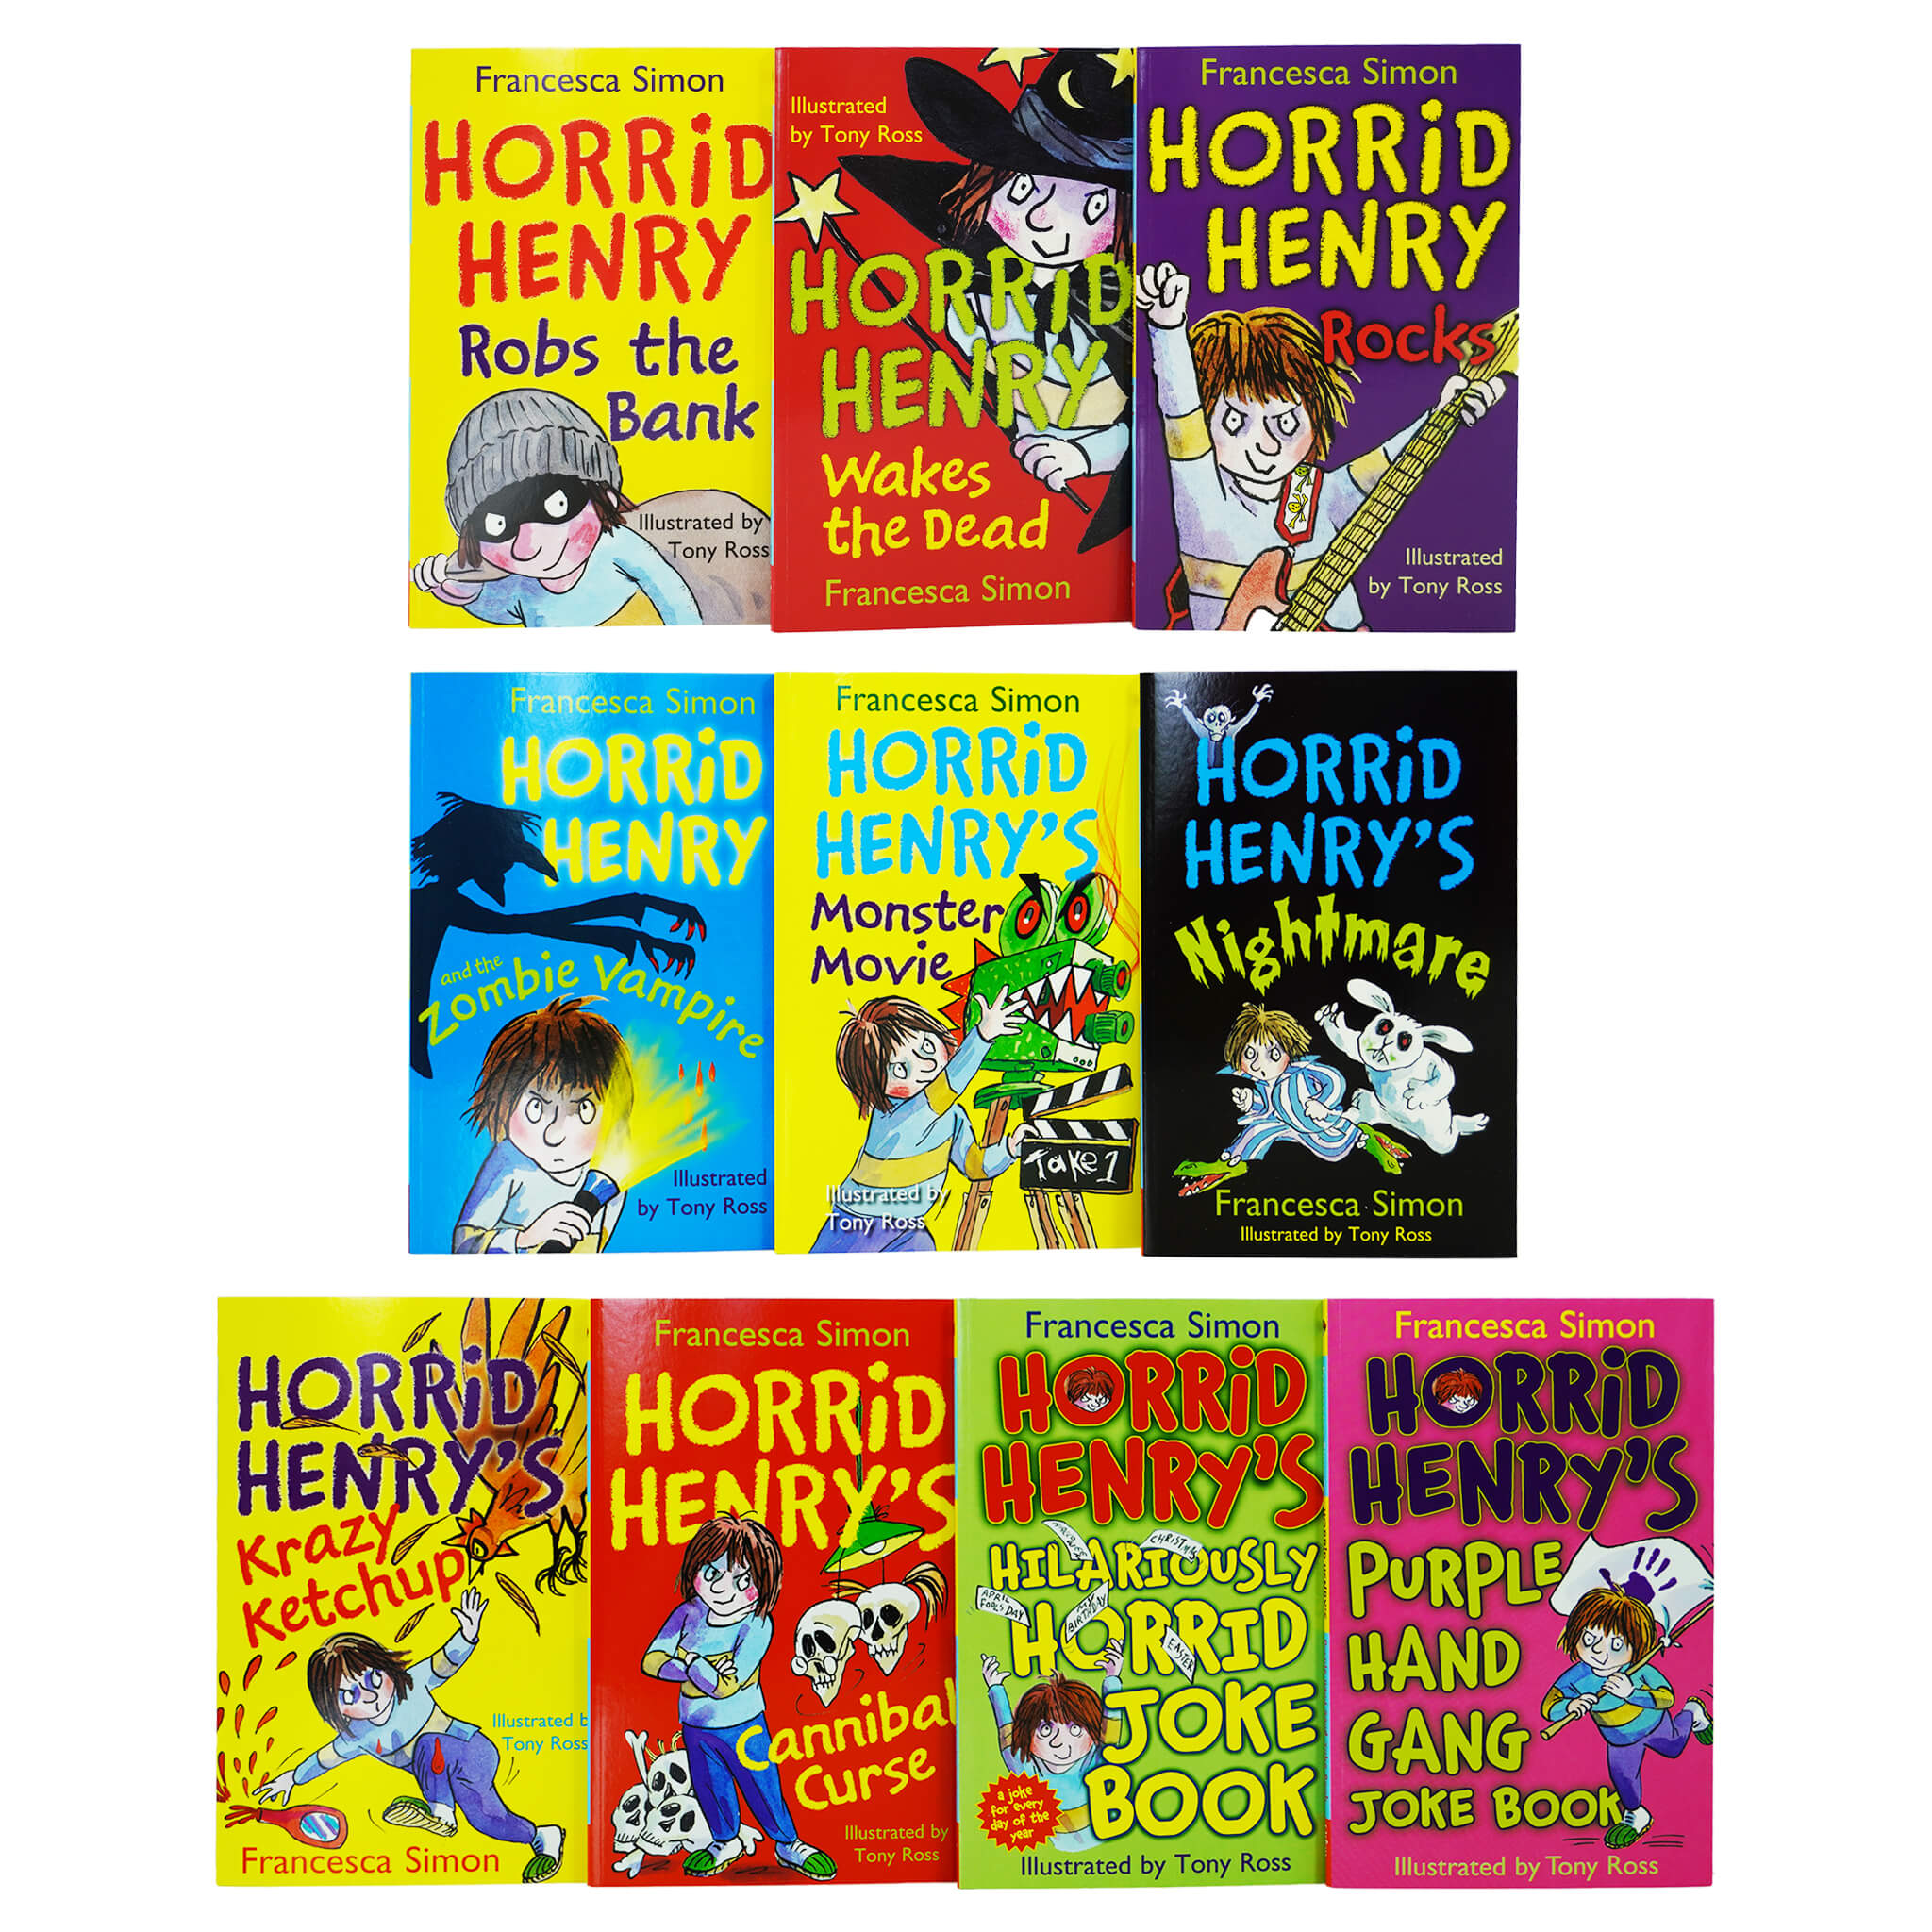 Horrid Henry's Totally Terrible Collection 10 Books Box Set by Francesca Simon - Ages 6-11 - Paperback